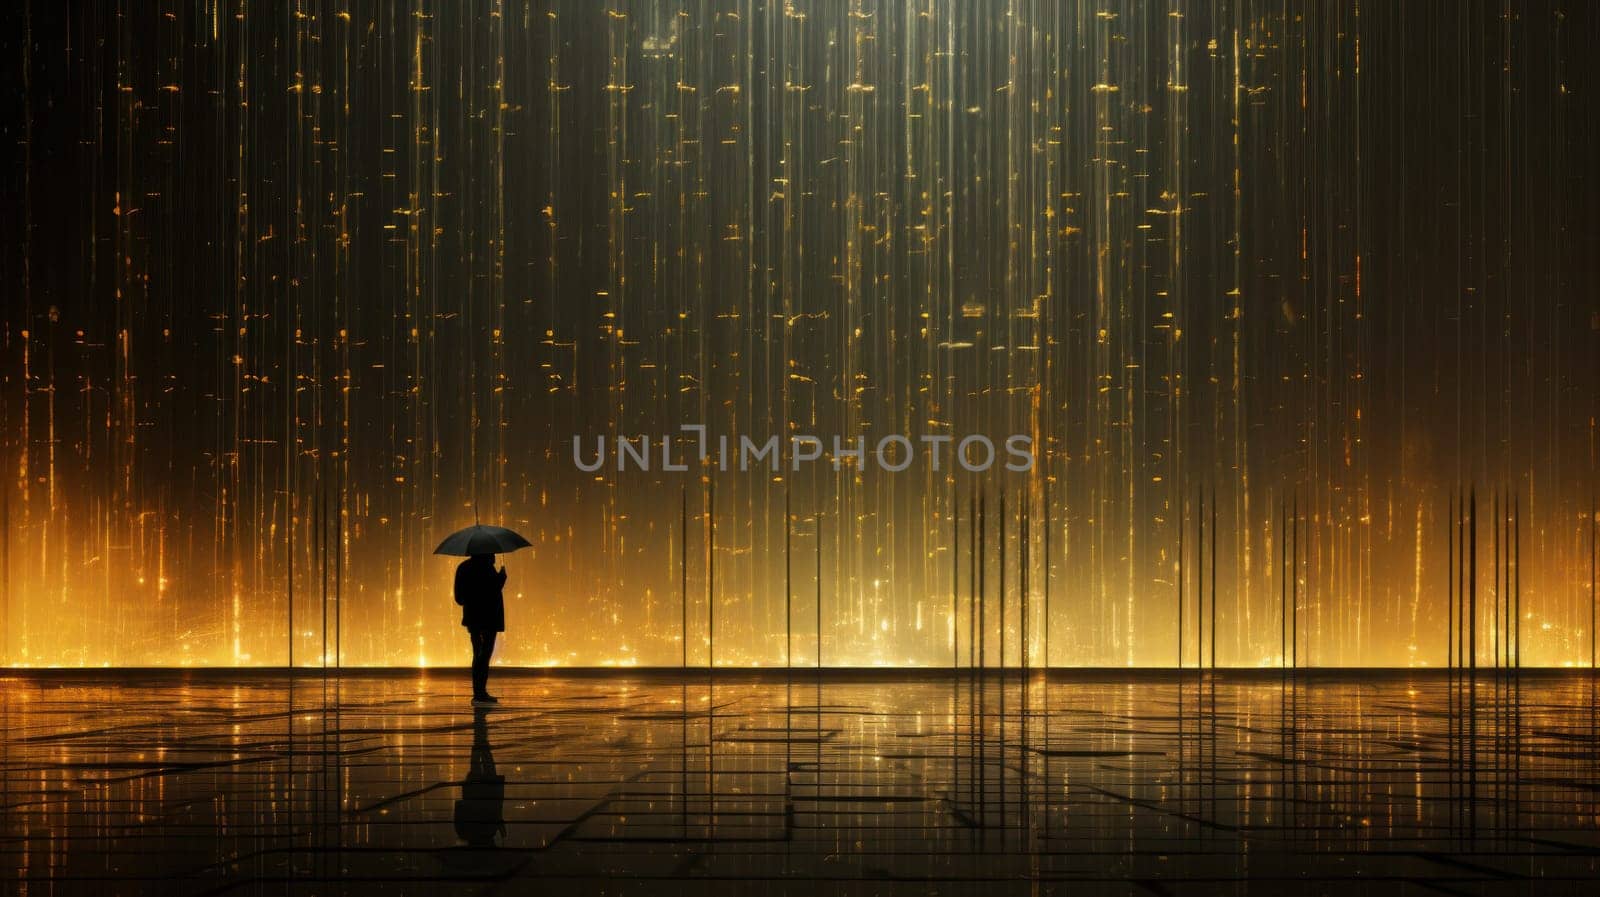 A person standing in the rain holding an umbrella